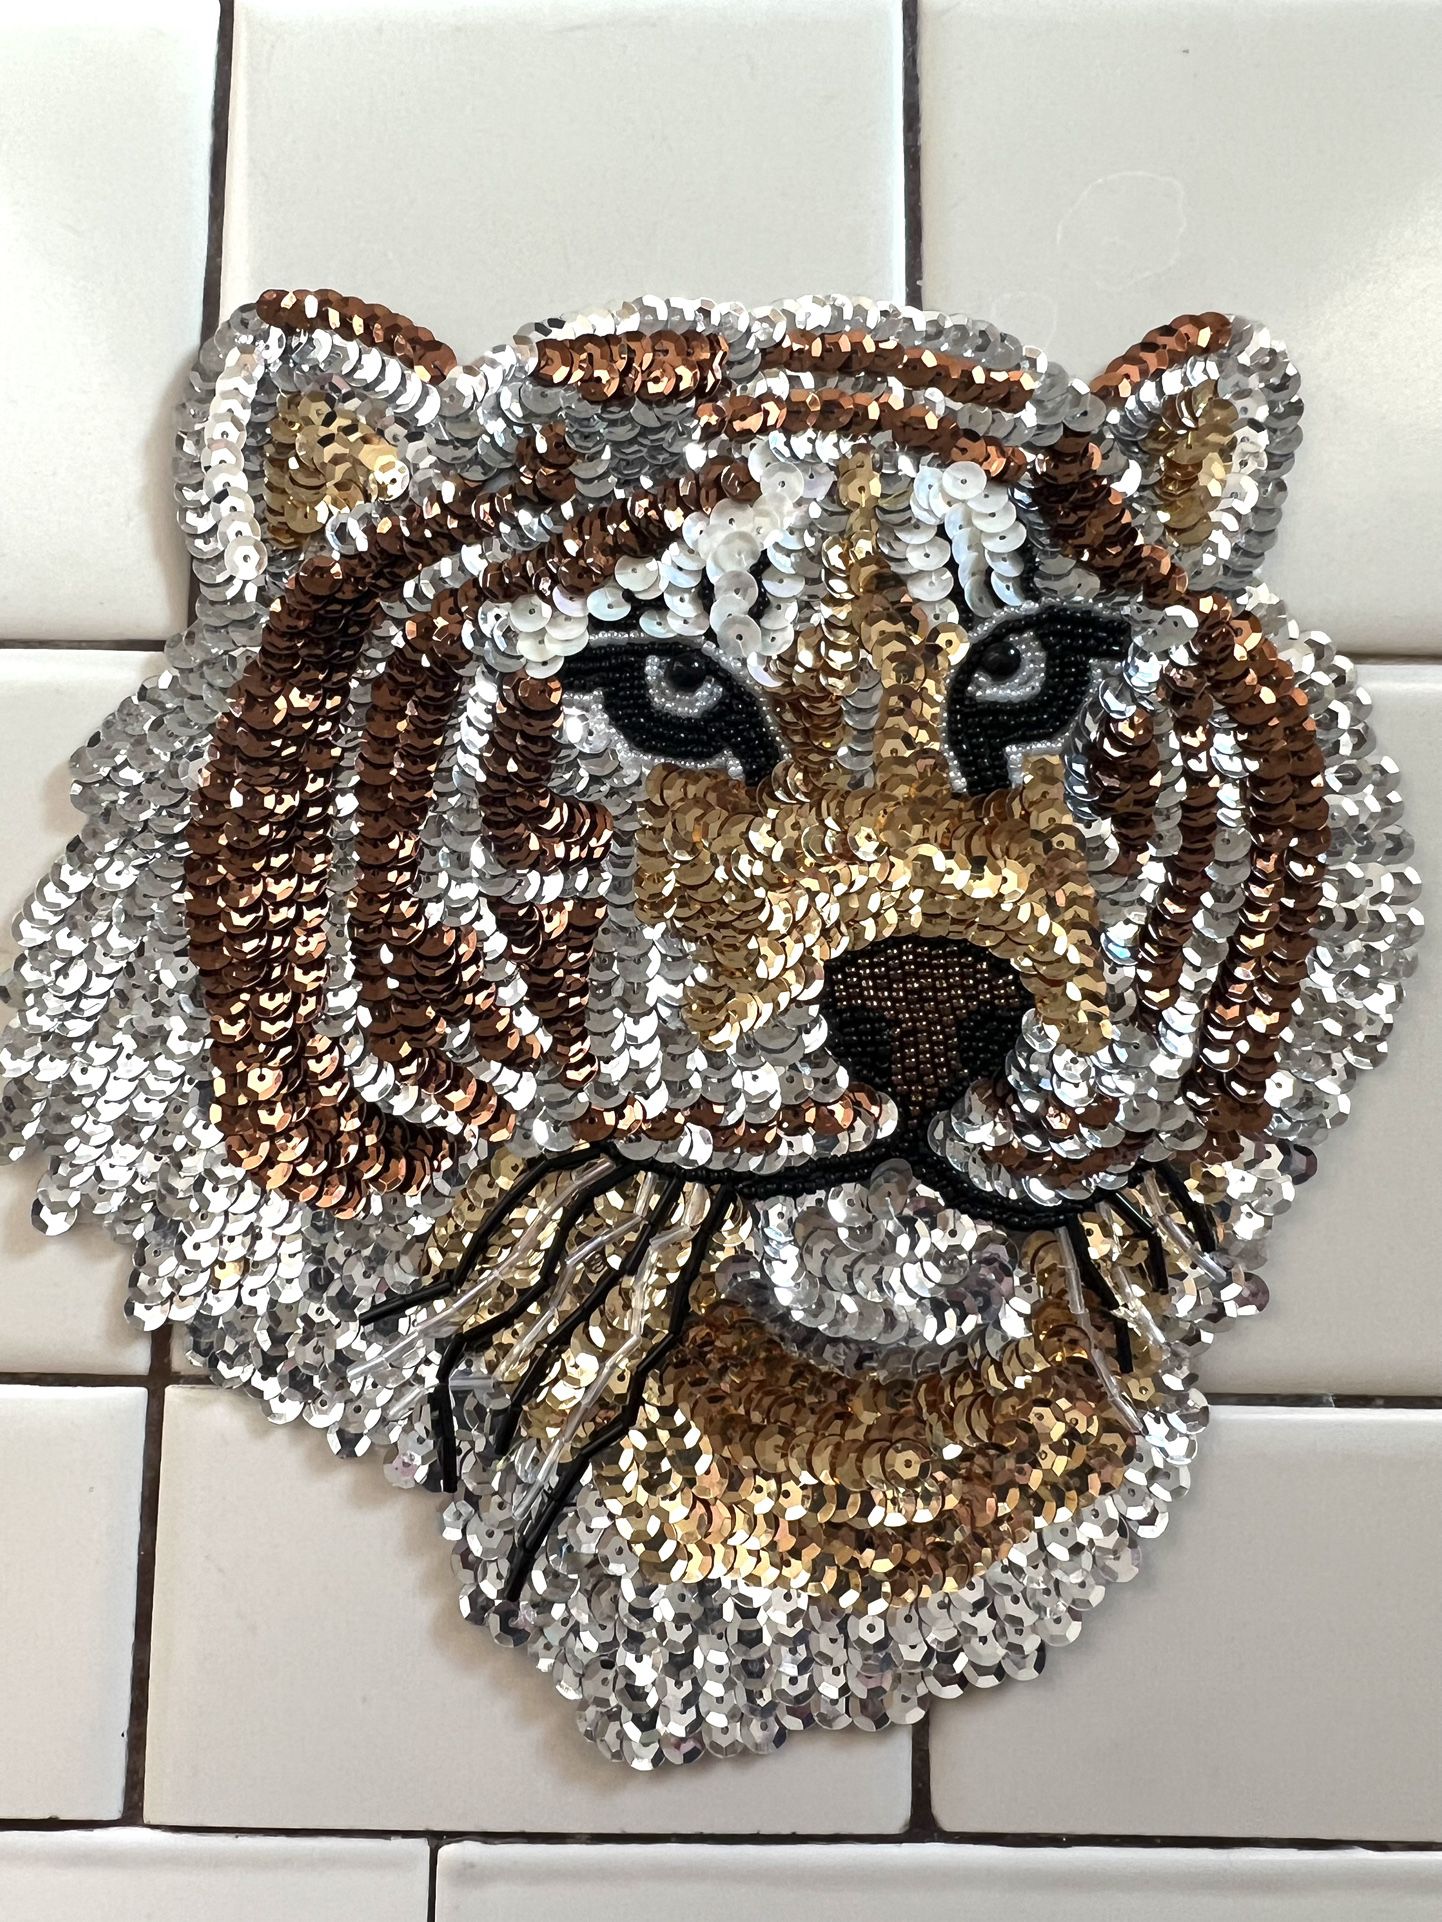 Sequin Tiger Head Sew On 